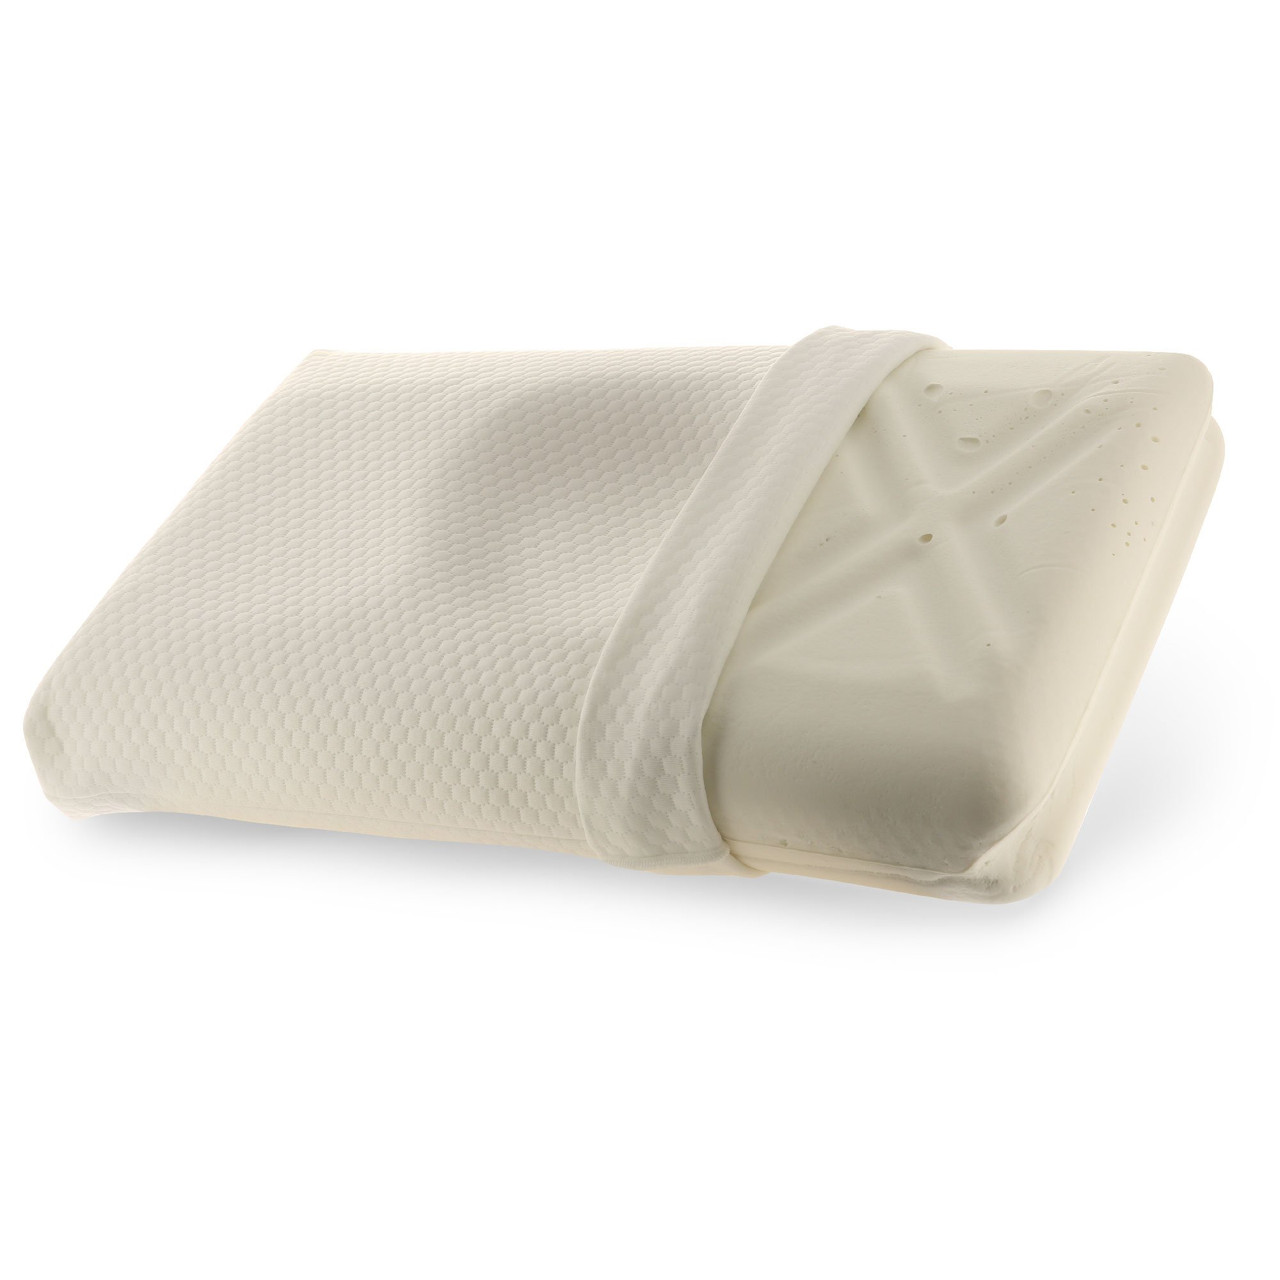 Ultimate Pillow - 4 in 1 Cervical Support For Comfort & Correction